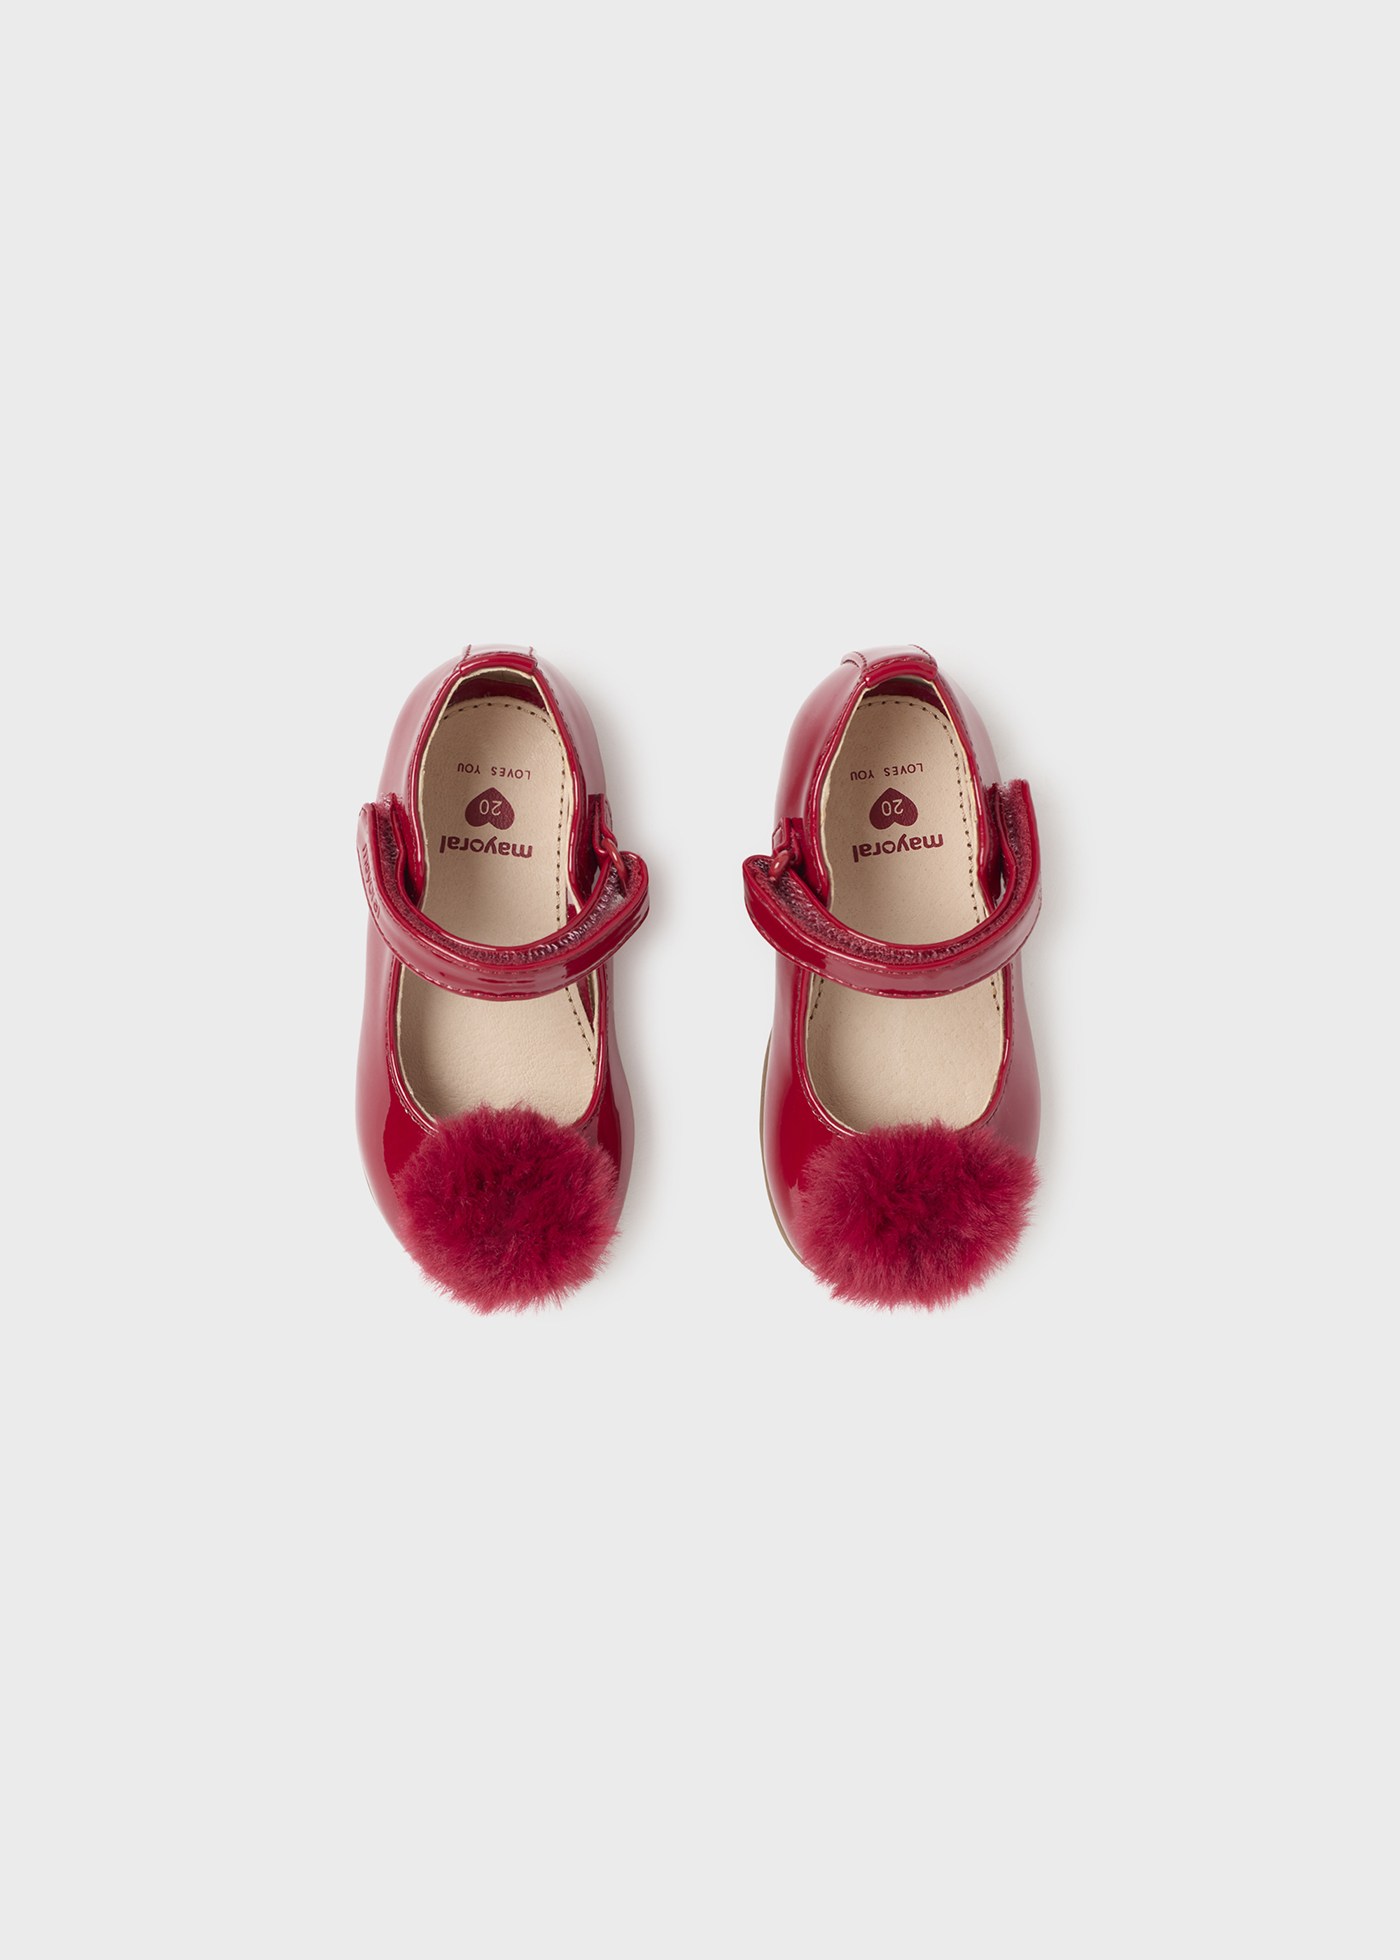 Pom pom mary janes sustainable leather baby